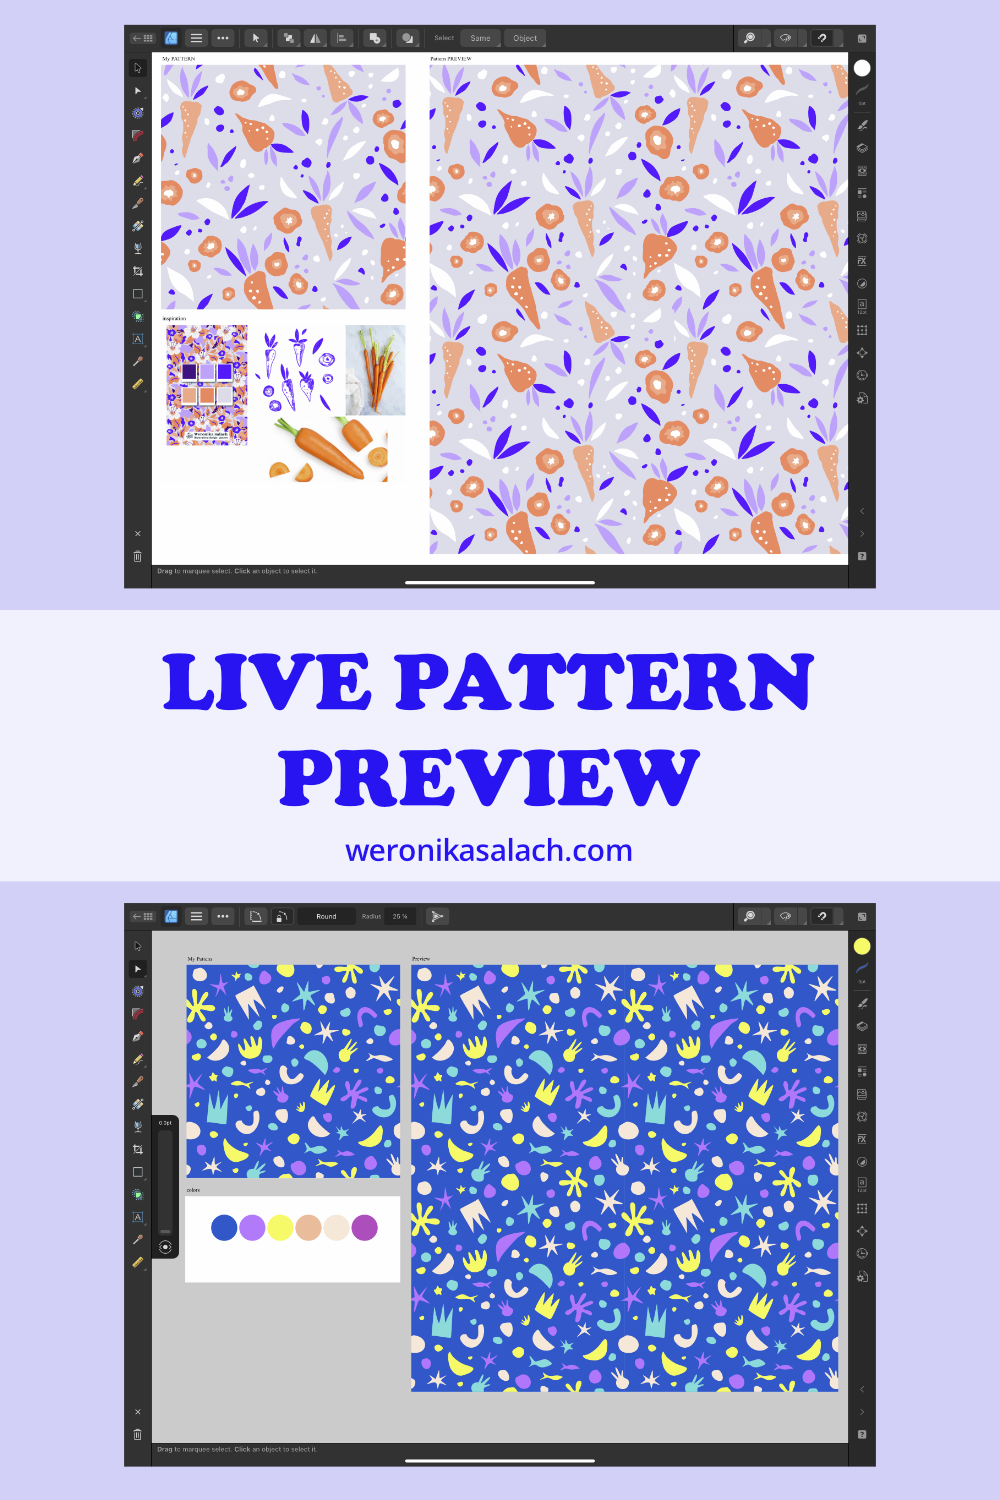 live pattern preview affinity designer ipad.png